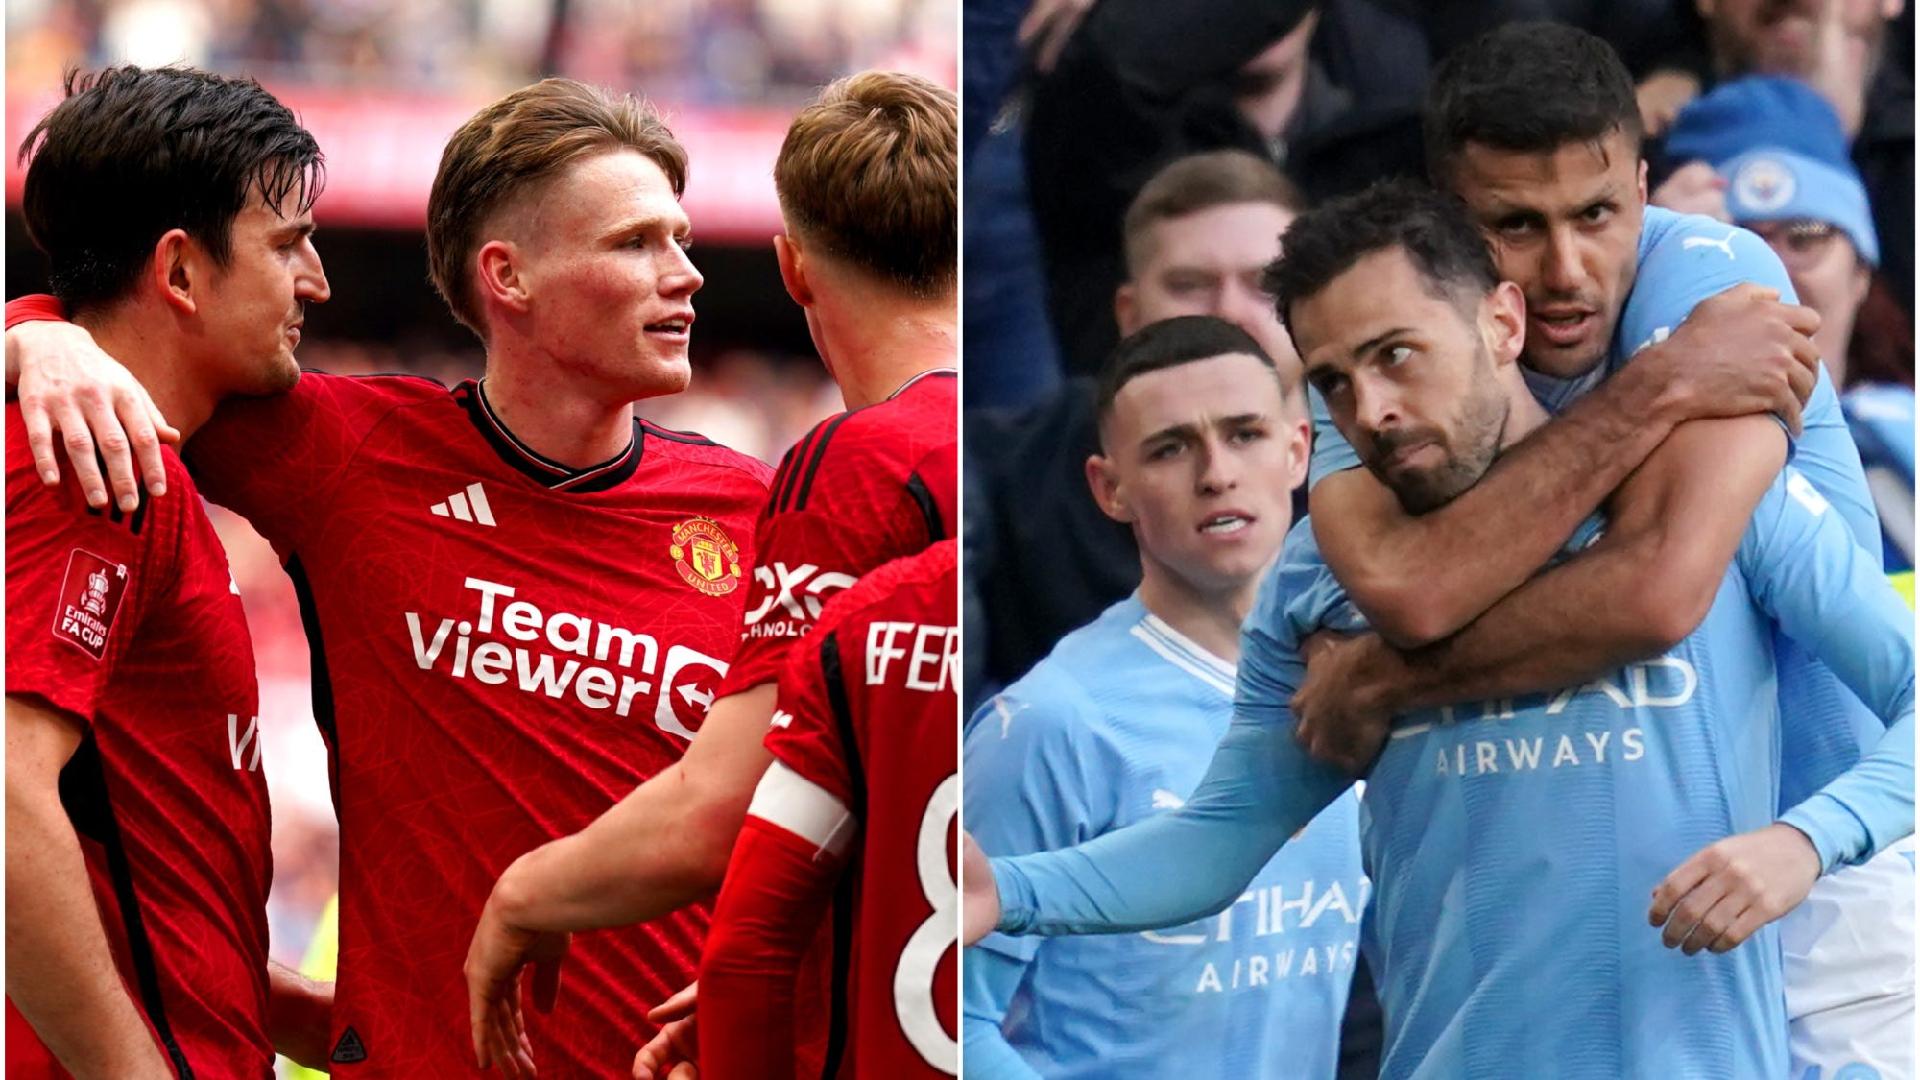 Facts and figures behind Manchester FA Cup derbies as rivals meet again in final